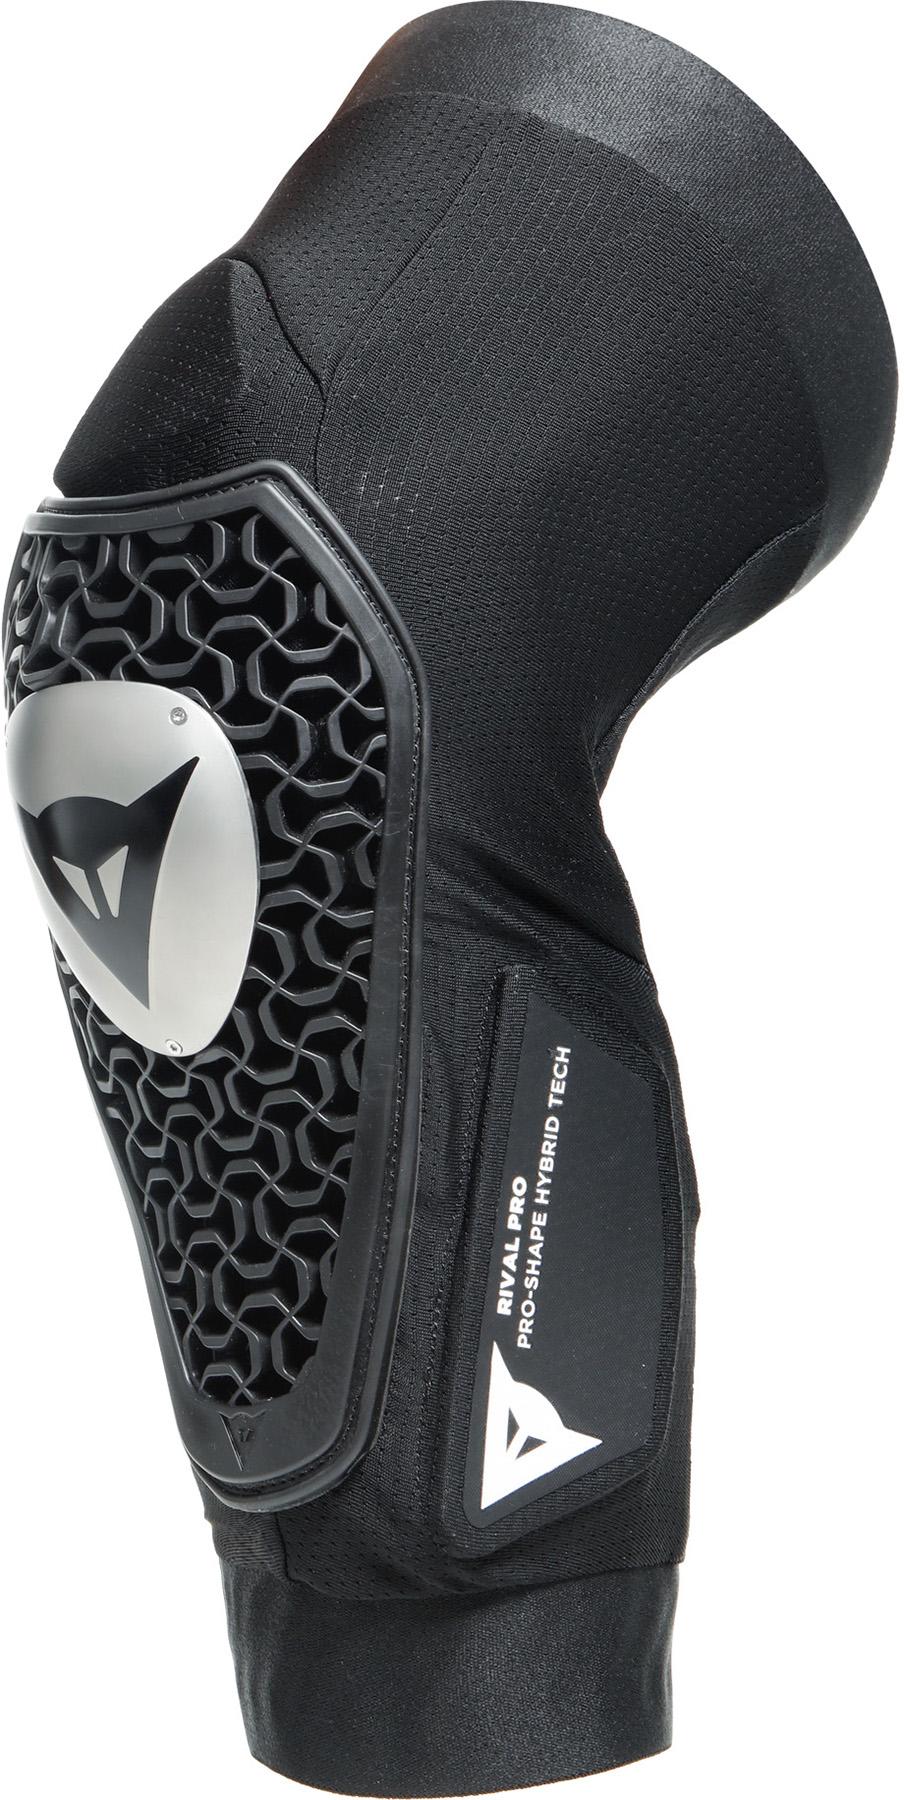 Dainese Rival Pro Knee Guard - Black